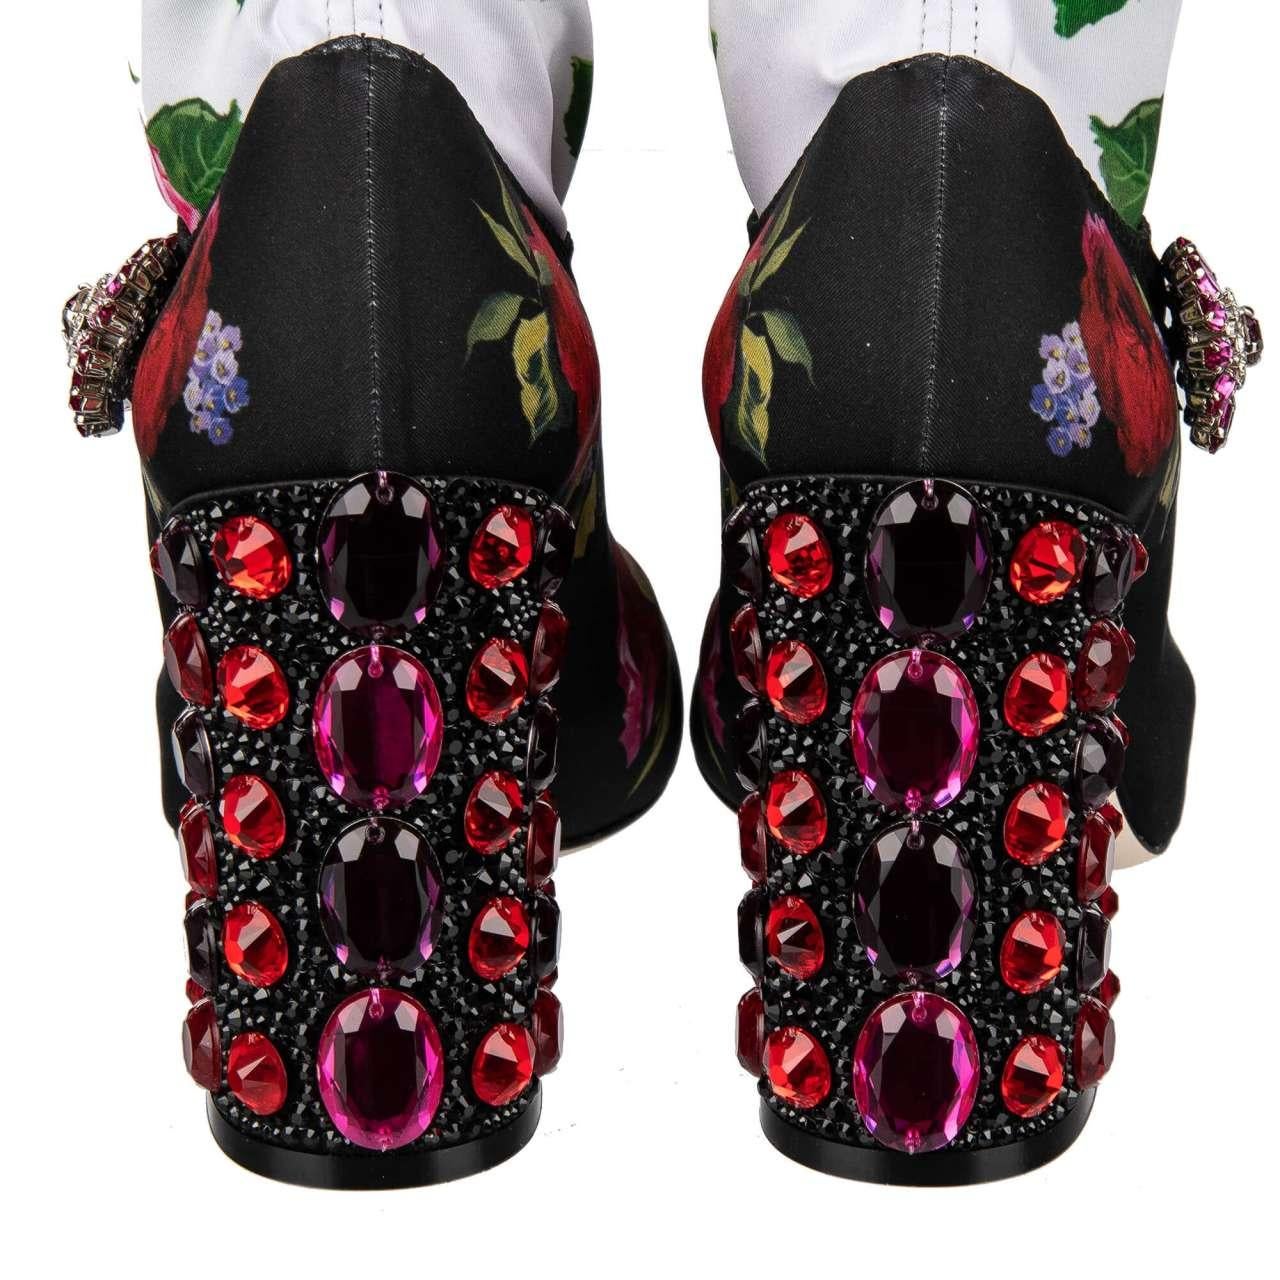 D&G Roses Printed Elastic Socks Pumps VALLY with Crystals Heel Black White 36 For Sale 2